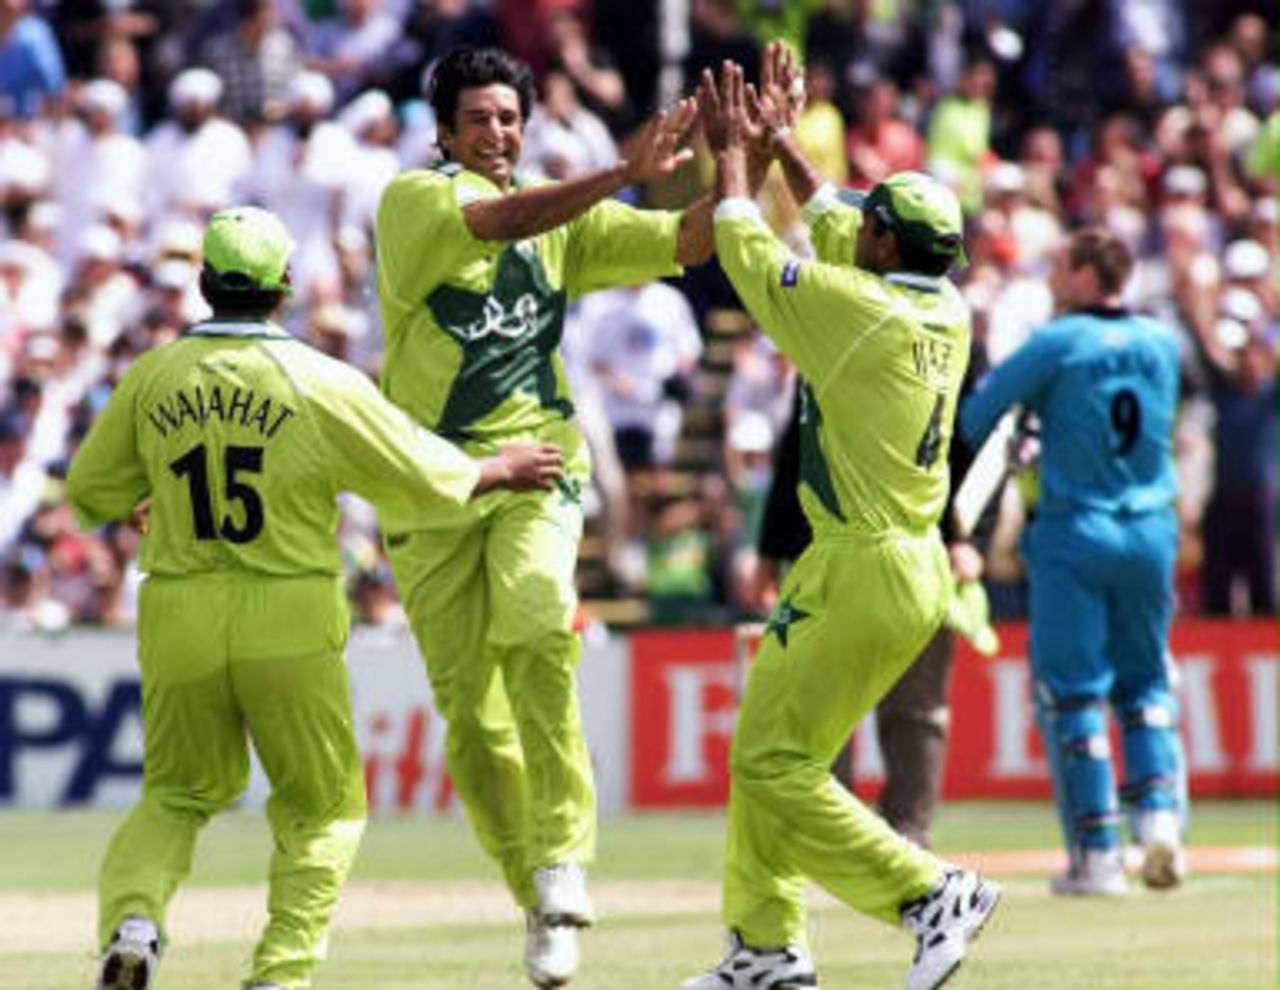 Wasim Akram (C) celebrates the wicket of New Zealand's Craig McMillan in the semi-final of the 1999 Cricket World Cup at Old Trafford in Manchester 16 June 1999